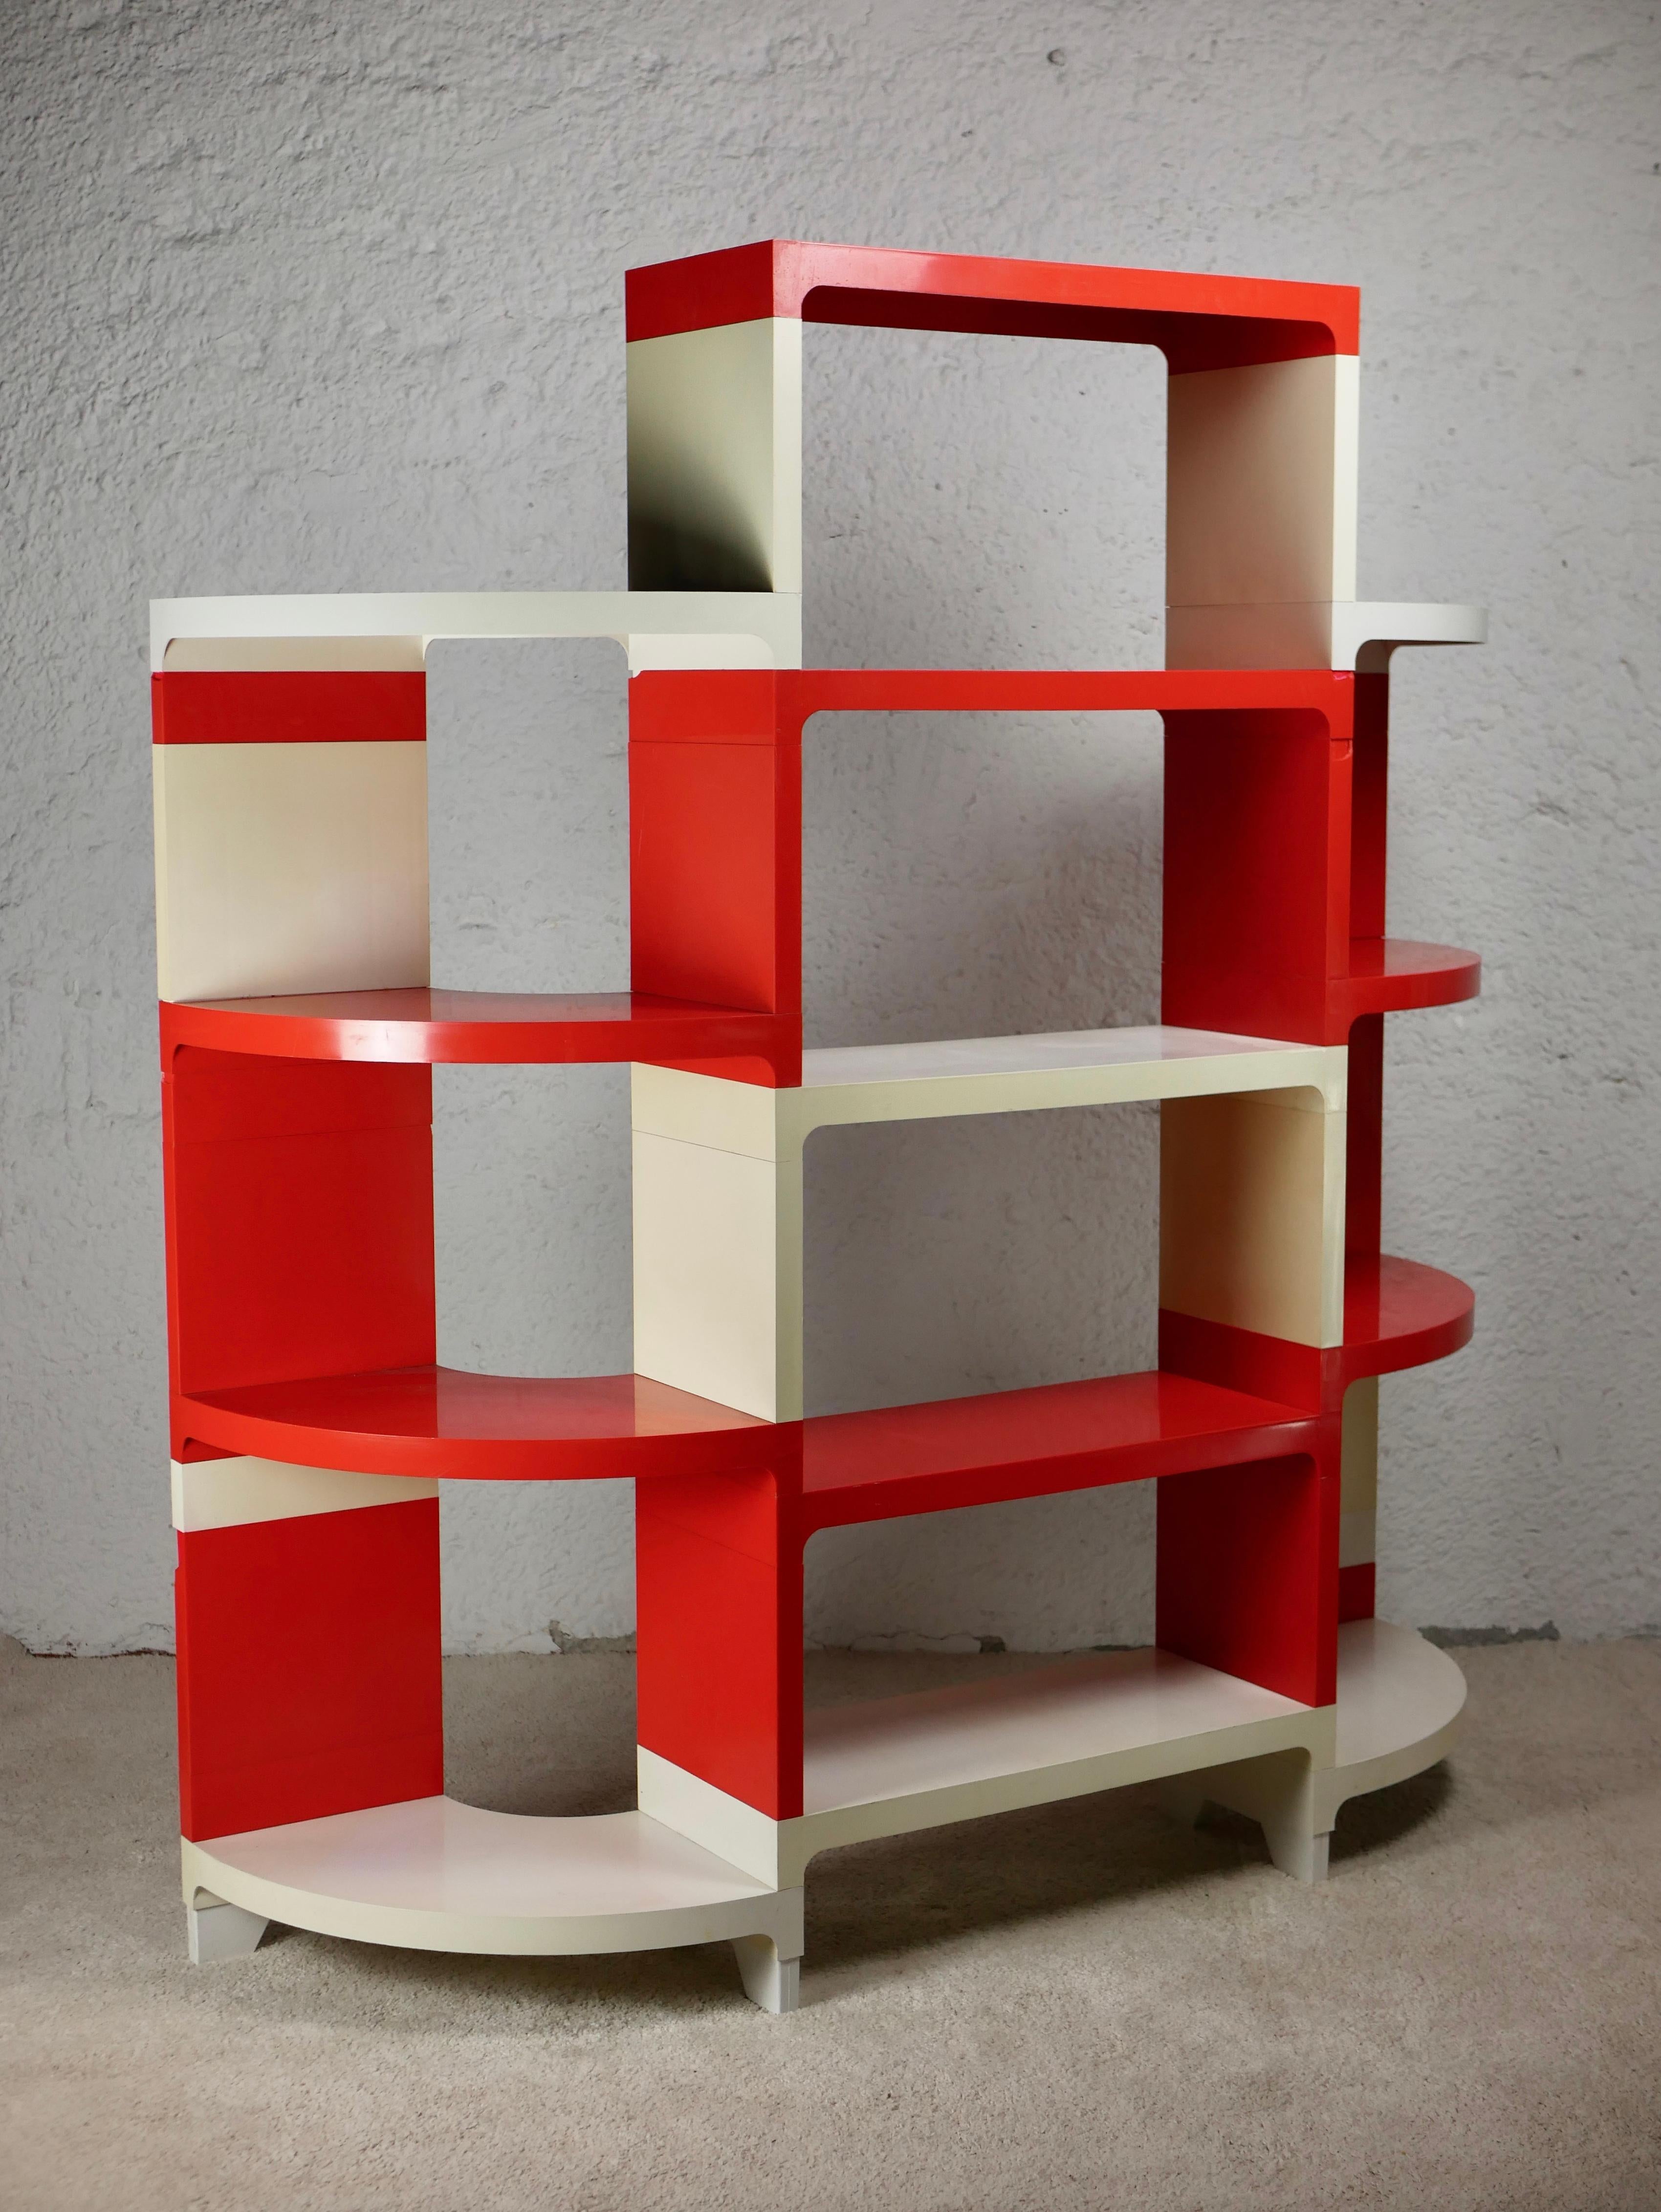 Unique set of modular shelves by Somm Paris for Prisunic, made in France in the 1970s. Prisunic is the ancestor of Monoprix, a big French supermarket, where you can also find clothes and designed furniture.
Red, beige and white shelves, modular, in